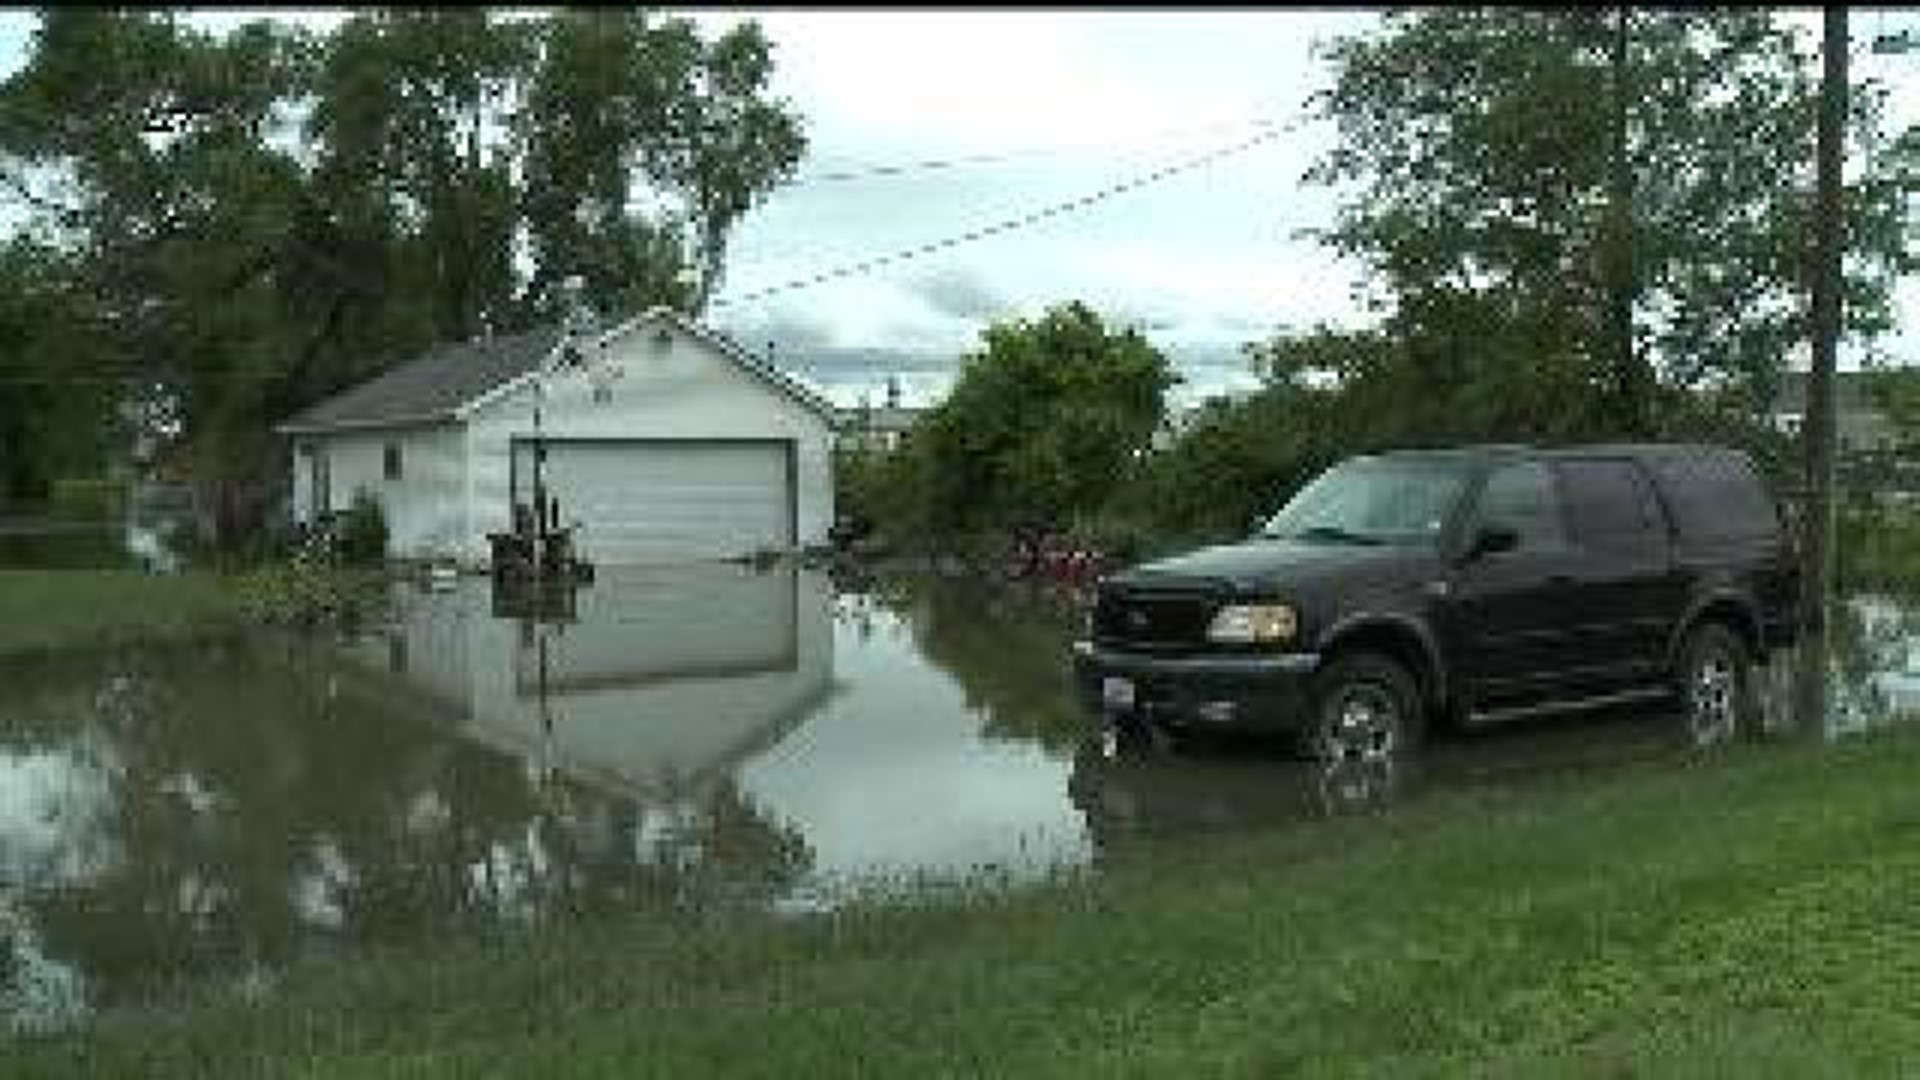 American Red Cross help for flood victims